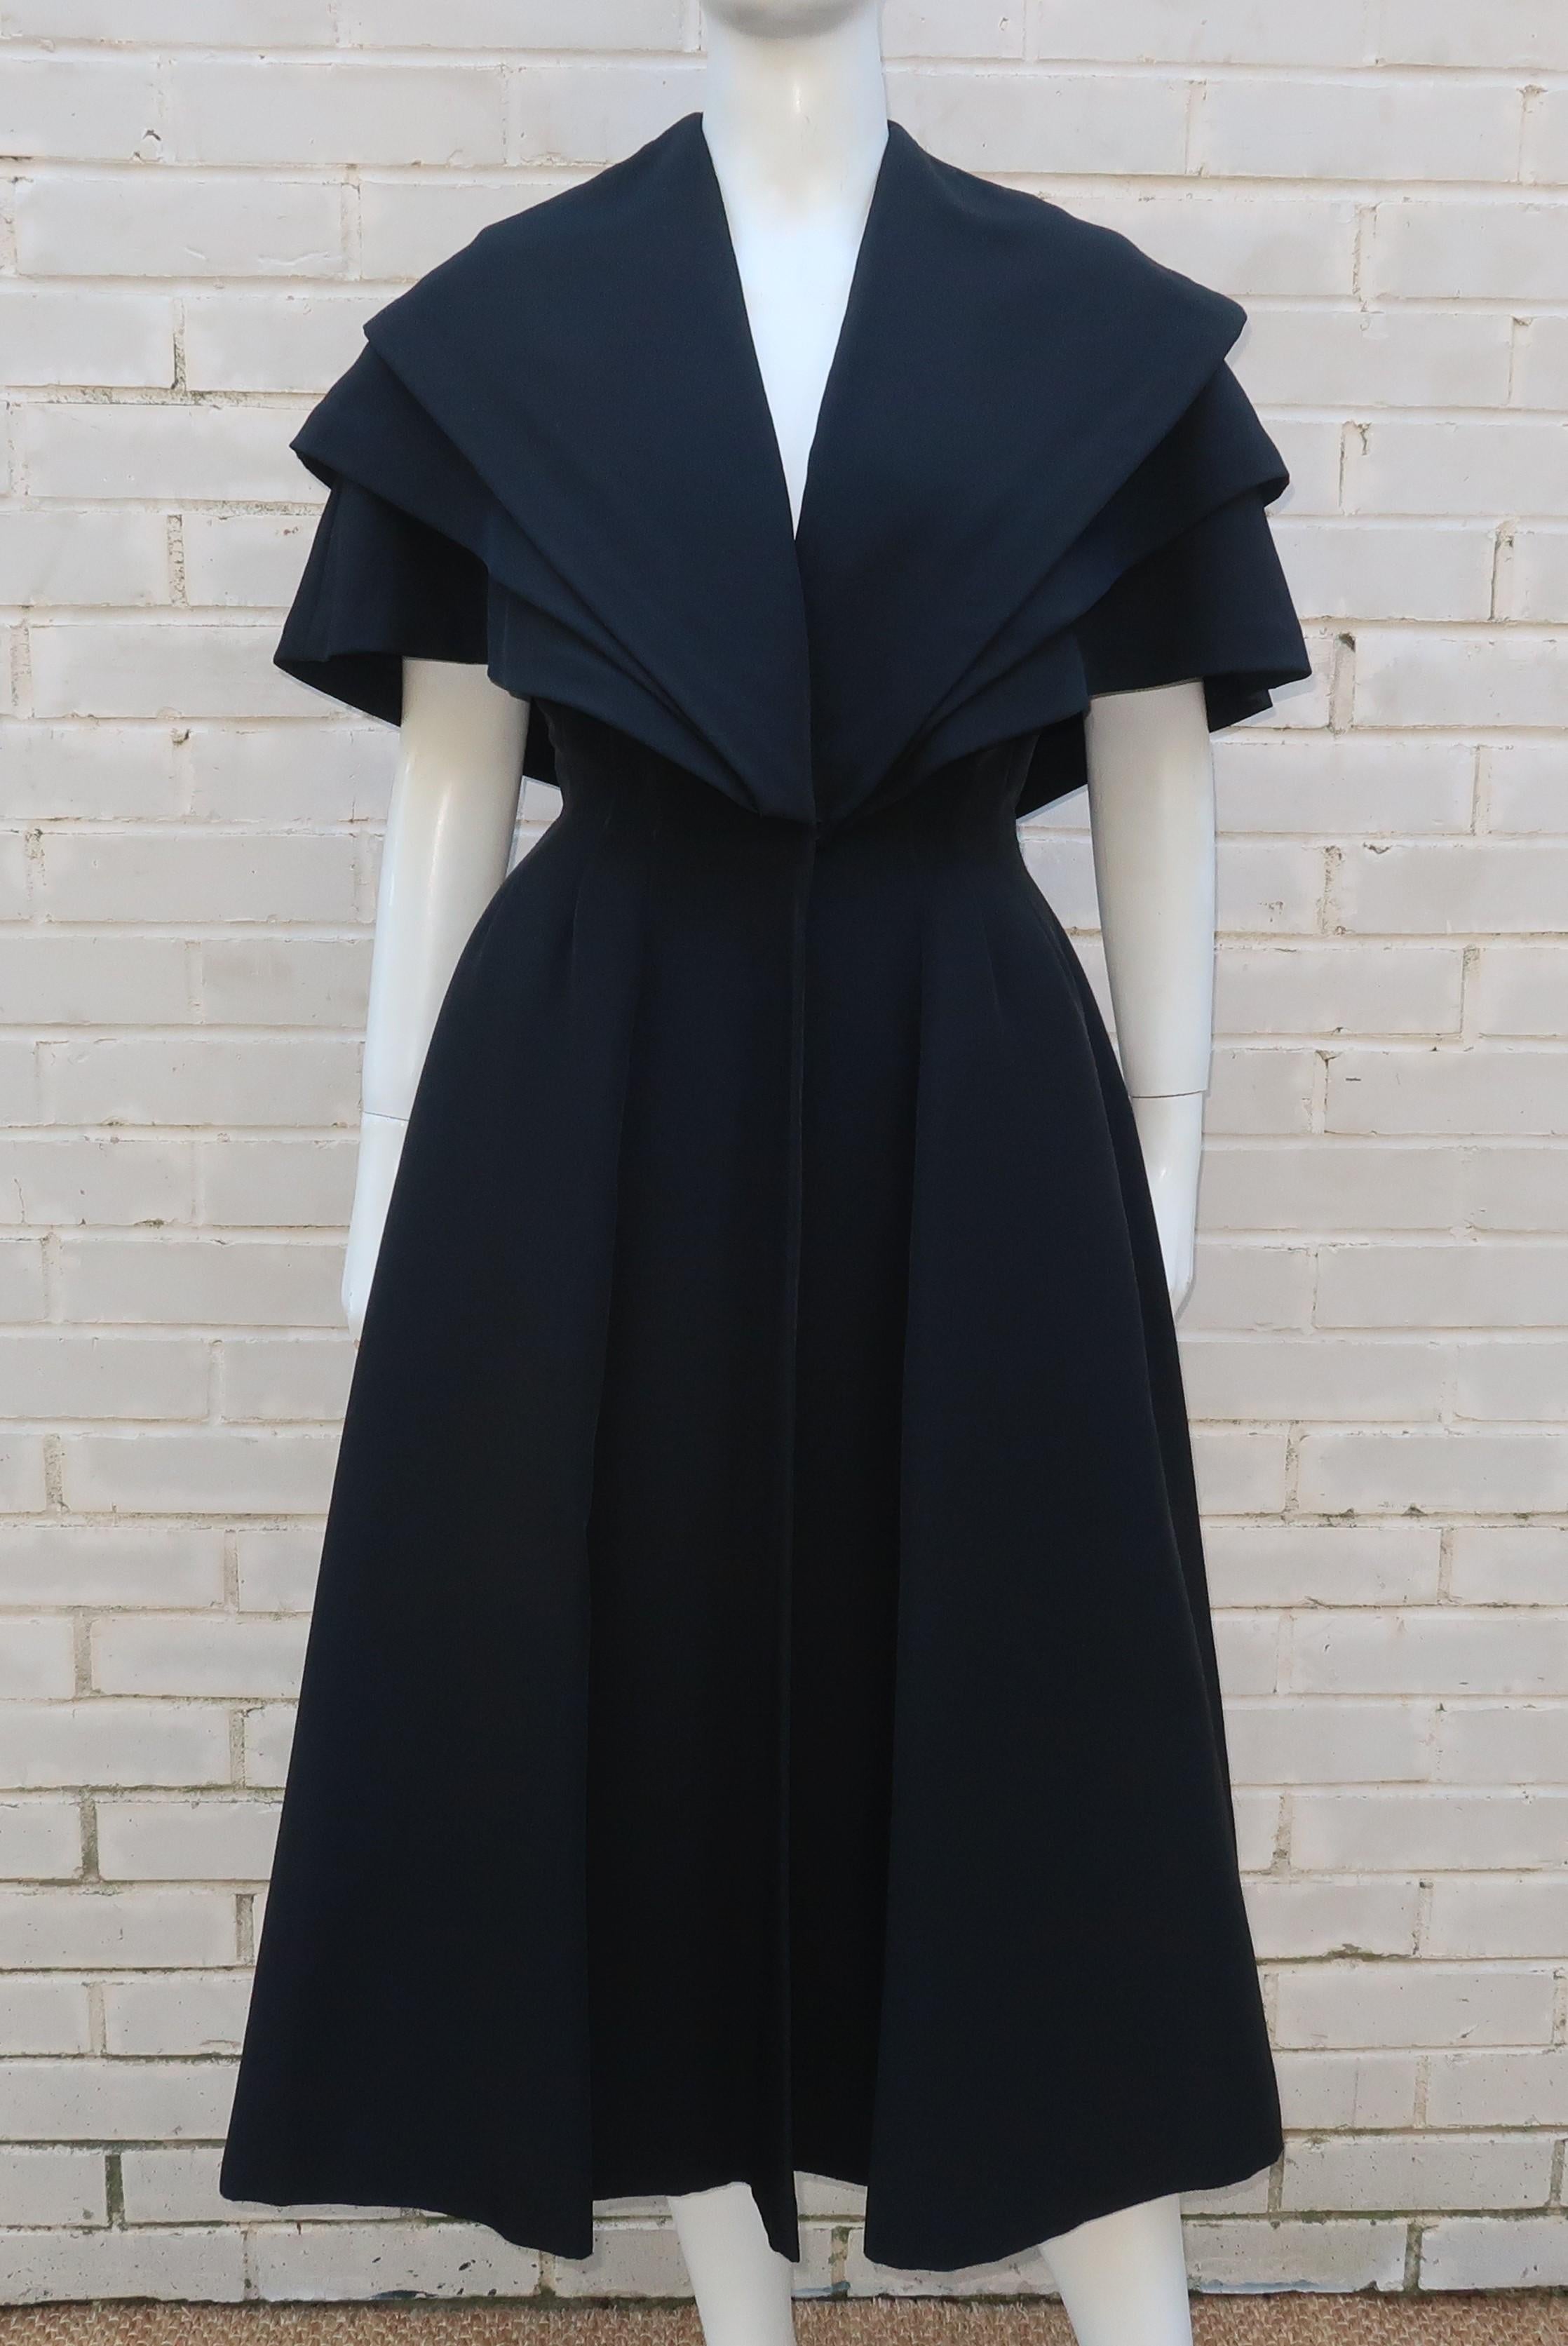 This amazing piece sold through Bonwit Teller, Philadelphia, C.1950, and is intended to be an evening coat but it could easily turn heads as a dress all on its own.  The heavy weight black silk faille fabric is tiered at the bodice providing a